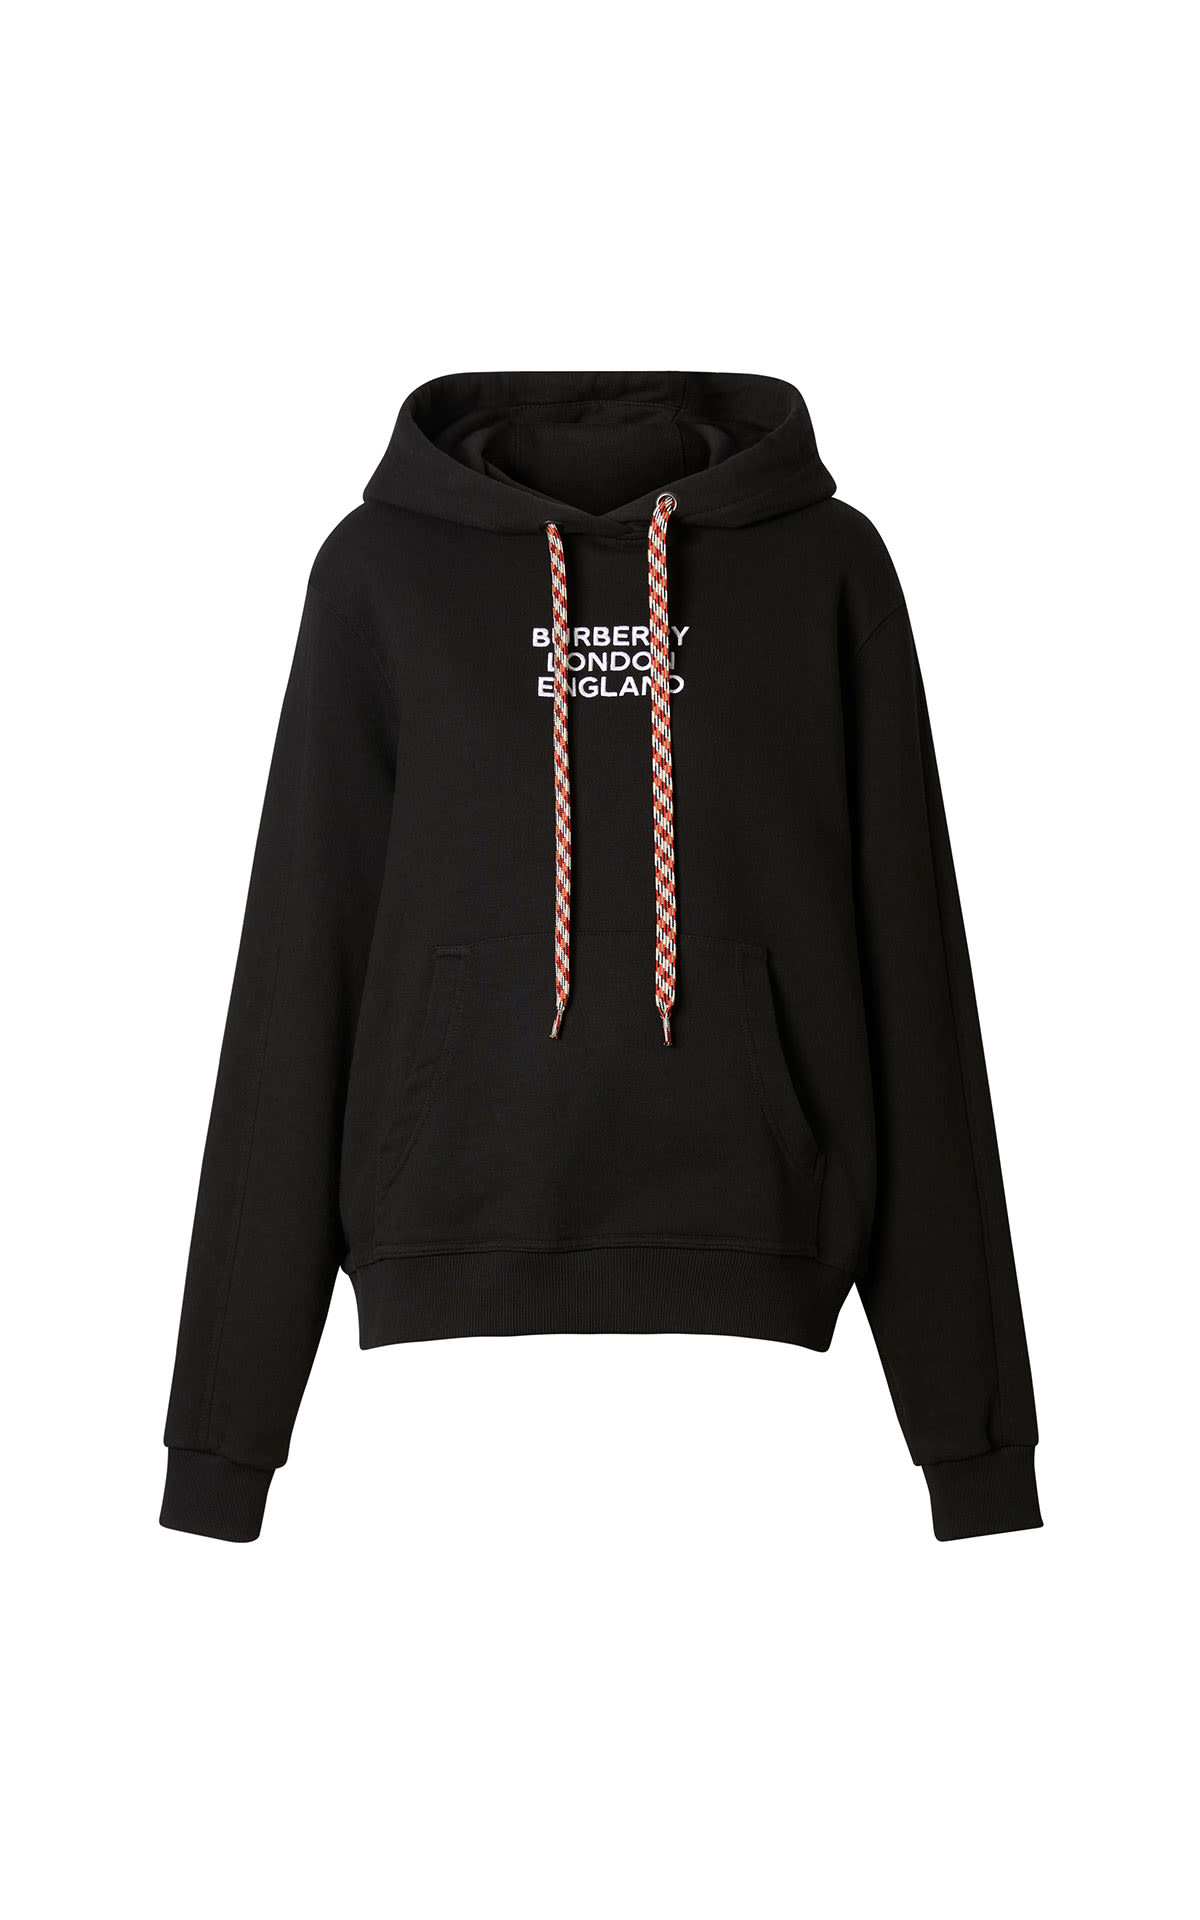 Burberry Burberry London England hoodie from Bicester Village